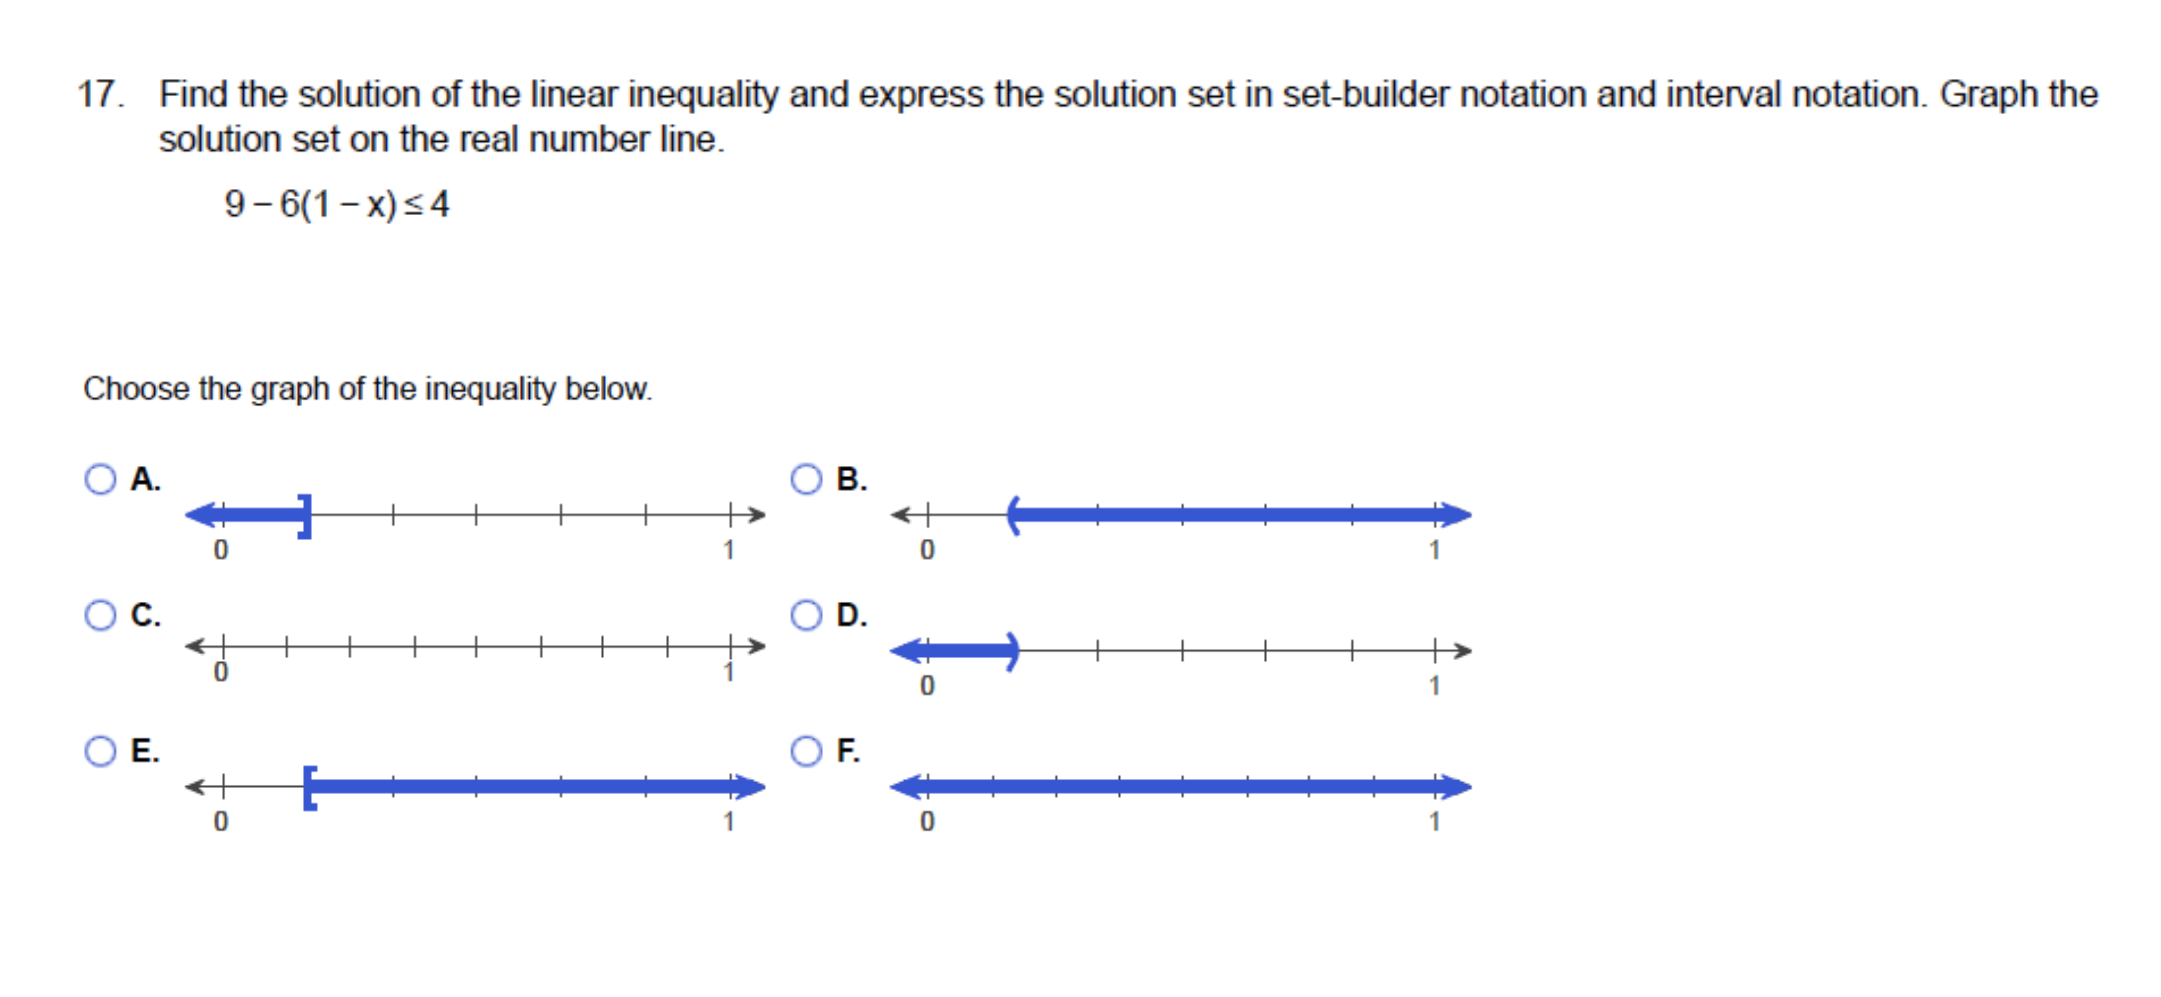 17. Find the solution of the linear inequality and express the solution set in set-builder notation and interval notation. Graph the
solution set on the real number line.
9- 6(1- x)<4
Choose the graph of the inequality below.
O A.
О.
D.
Е.
OF.
B.
